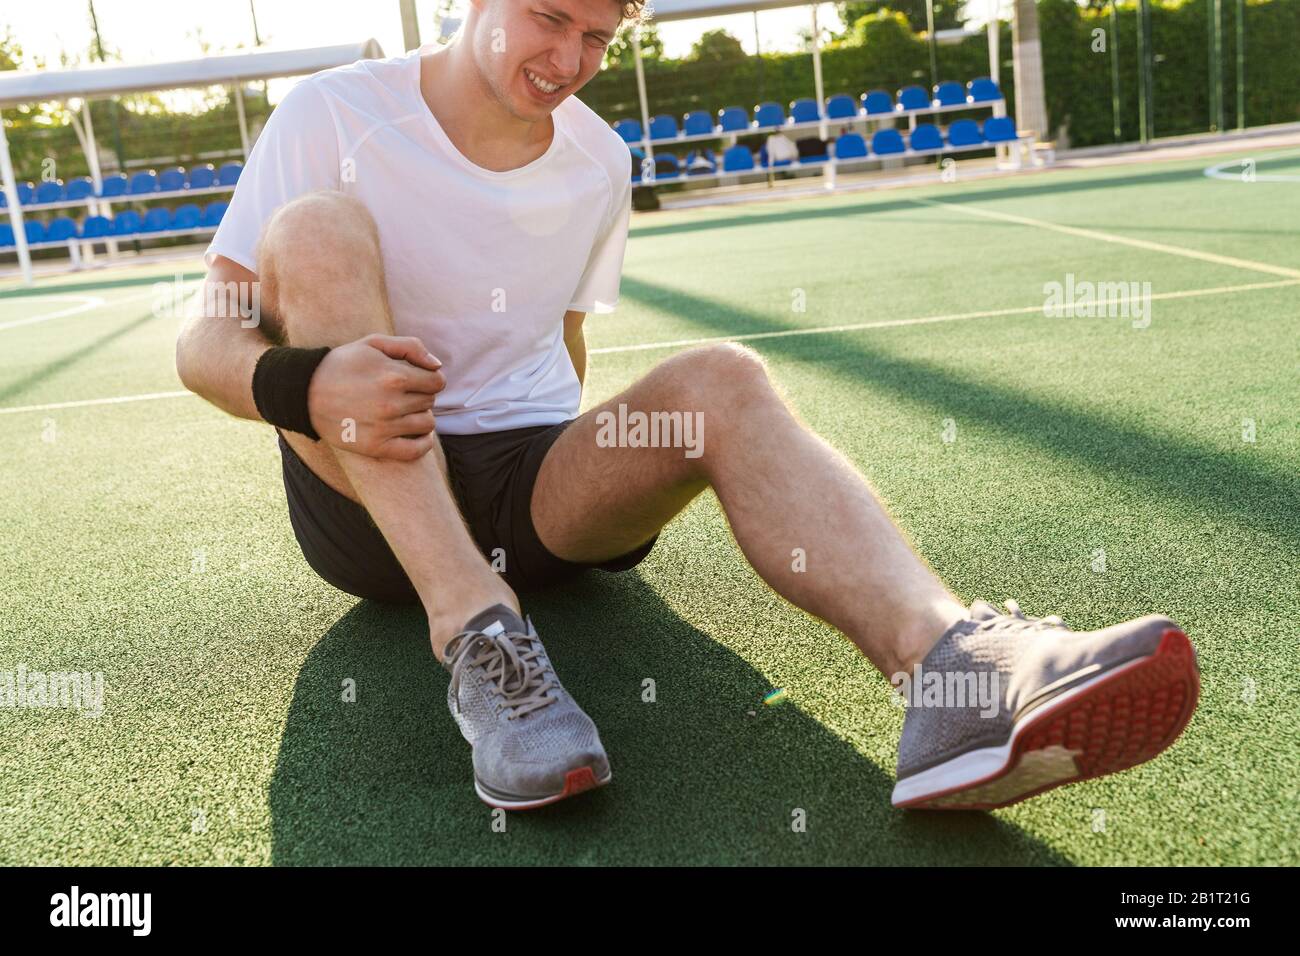 Image of tense man in sportswear having trauma and suffering from pain while sitting on playground outdoors Stock Photo